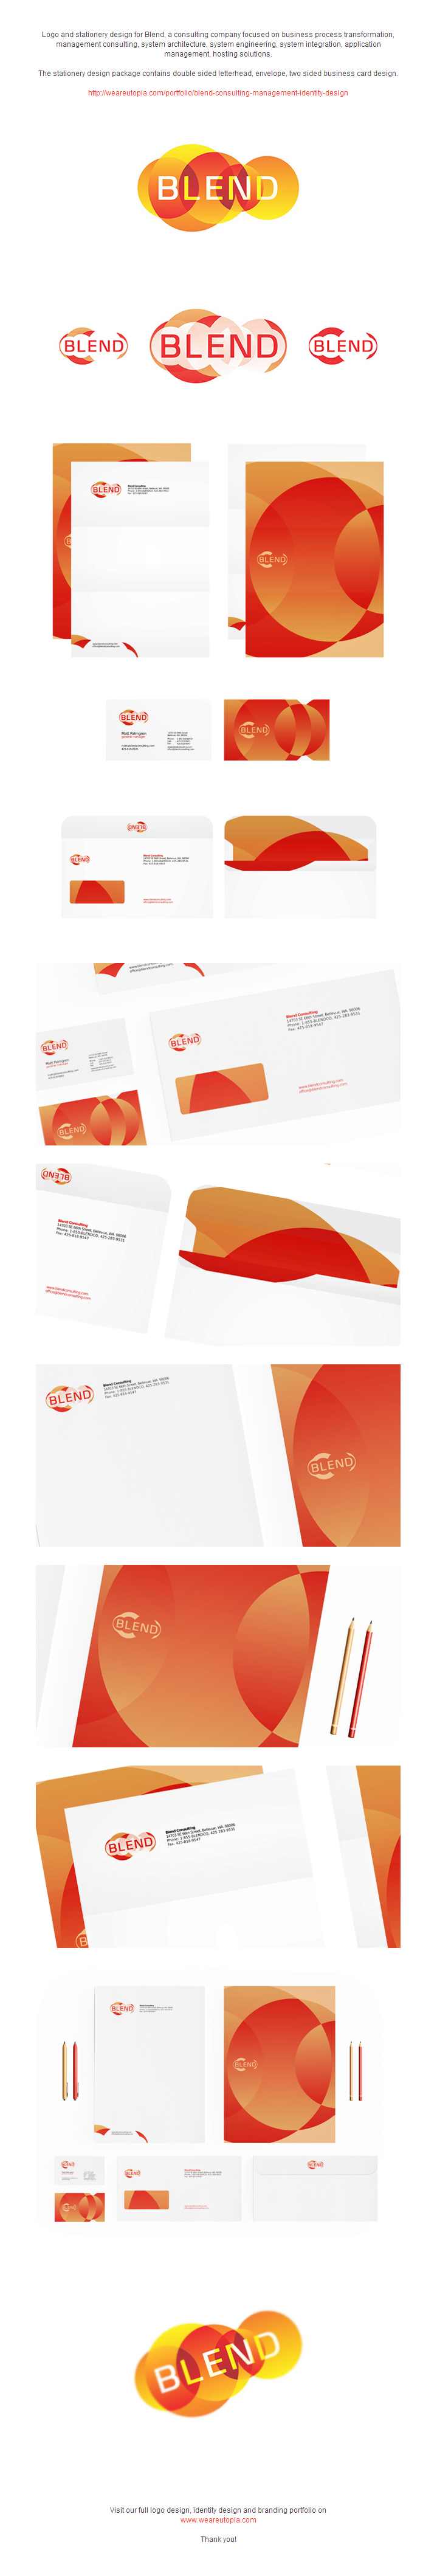 Blend logo and corporate identity design by Utopia Branding Agency 1 Blend logo and corporate identity design by Utopia Branding Agency